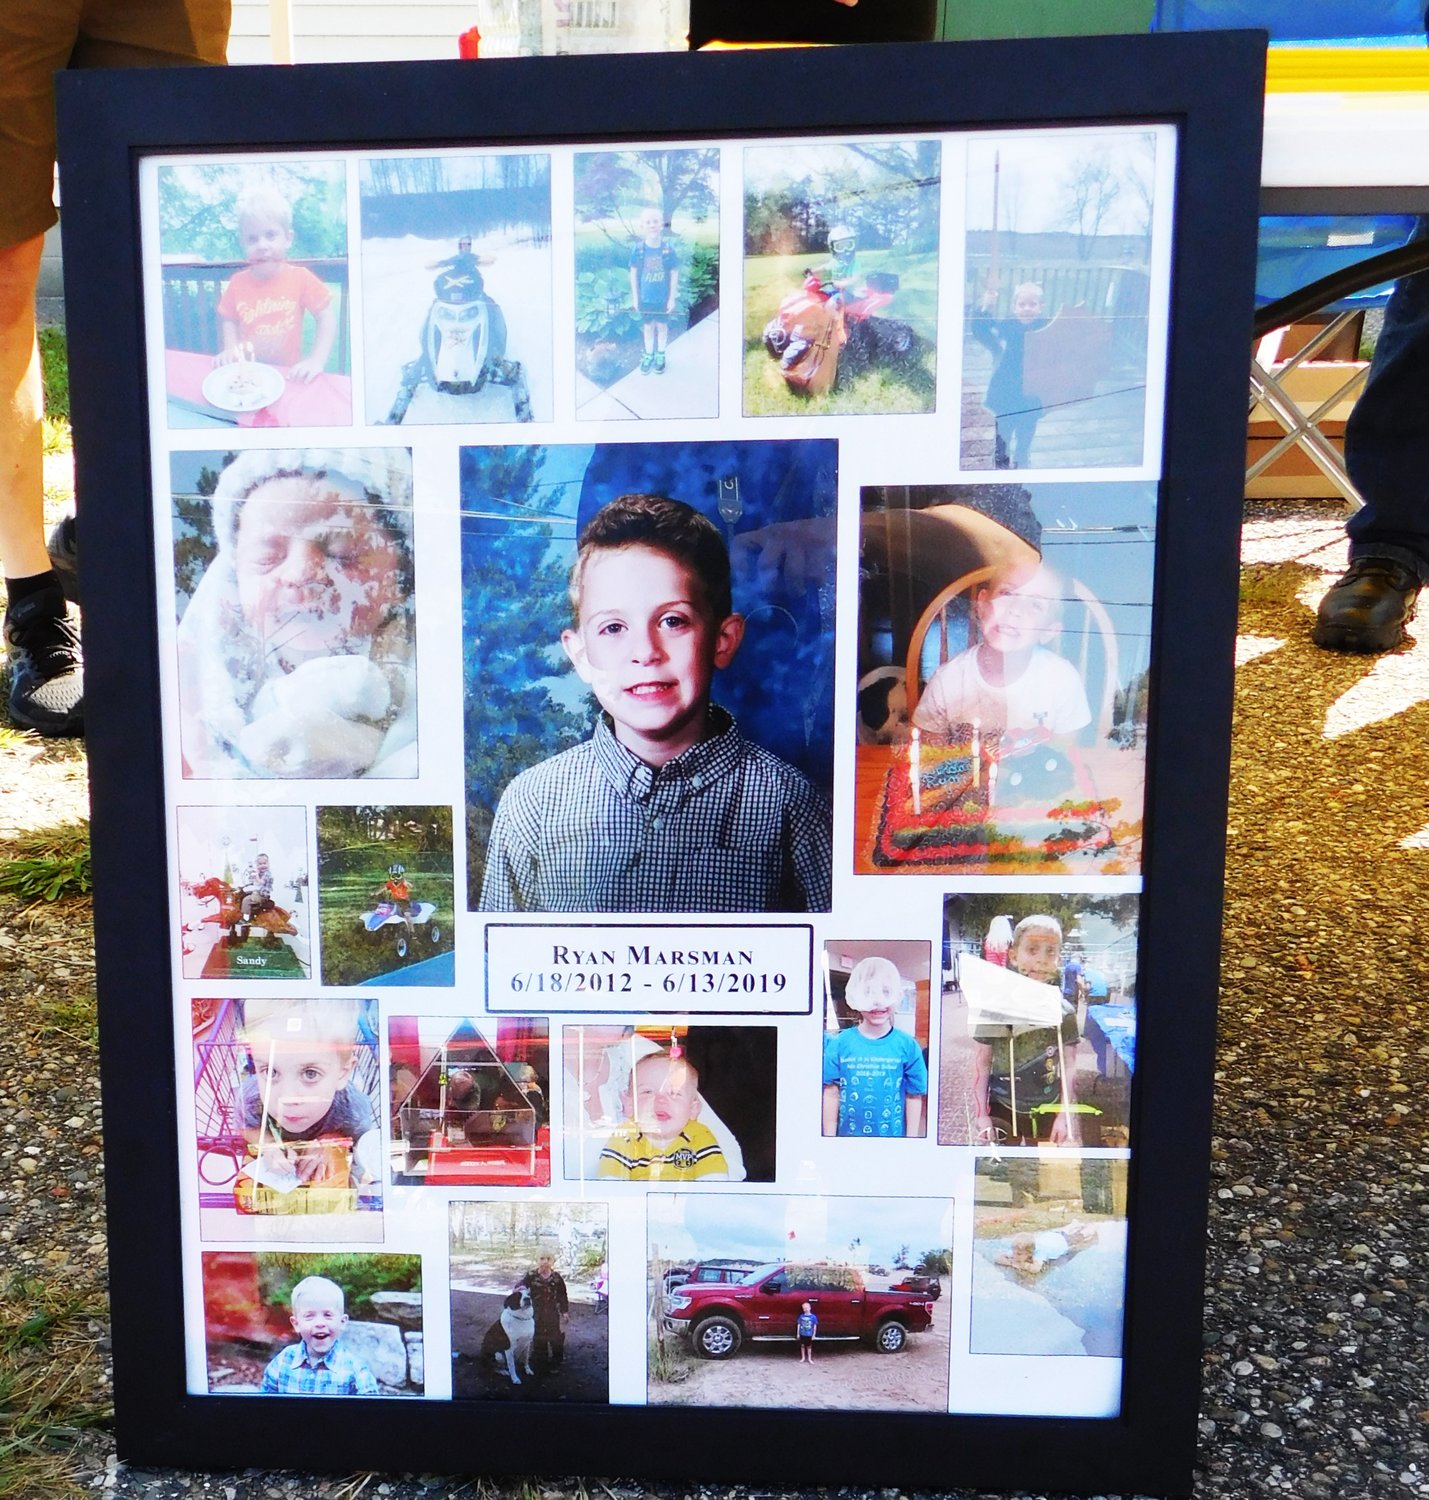 This photo collage of Ryan Marsman’s brief young life was displayed at the Riding For Ryan booth at Street Fair.